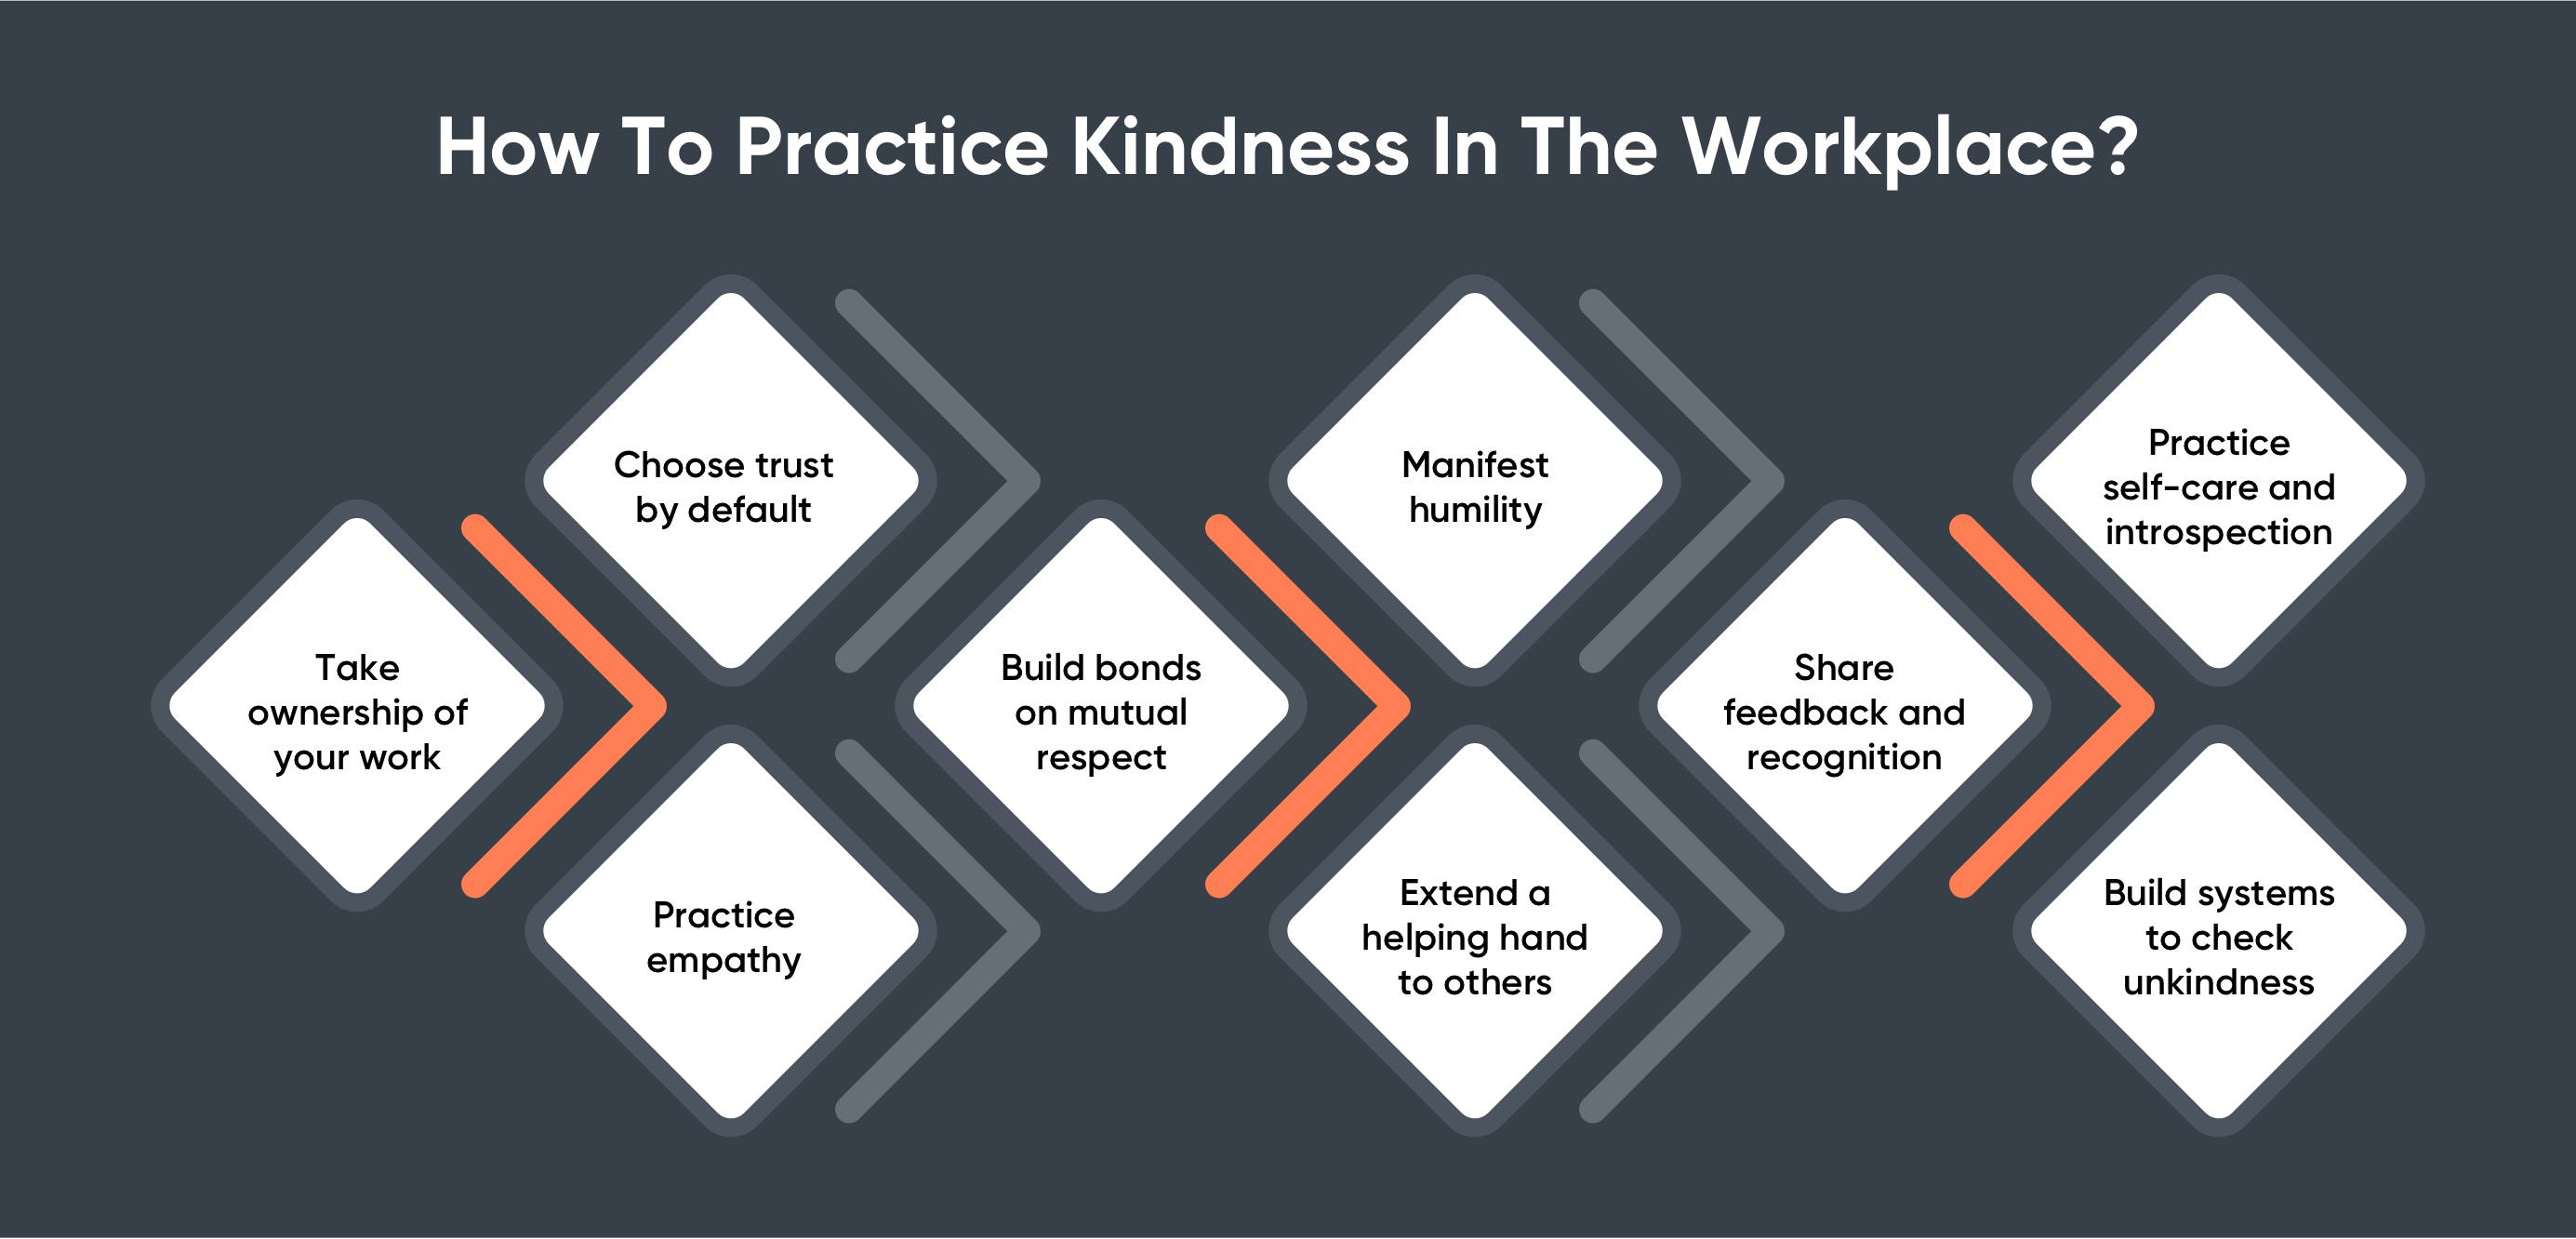 How to practice kindness at the workplace